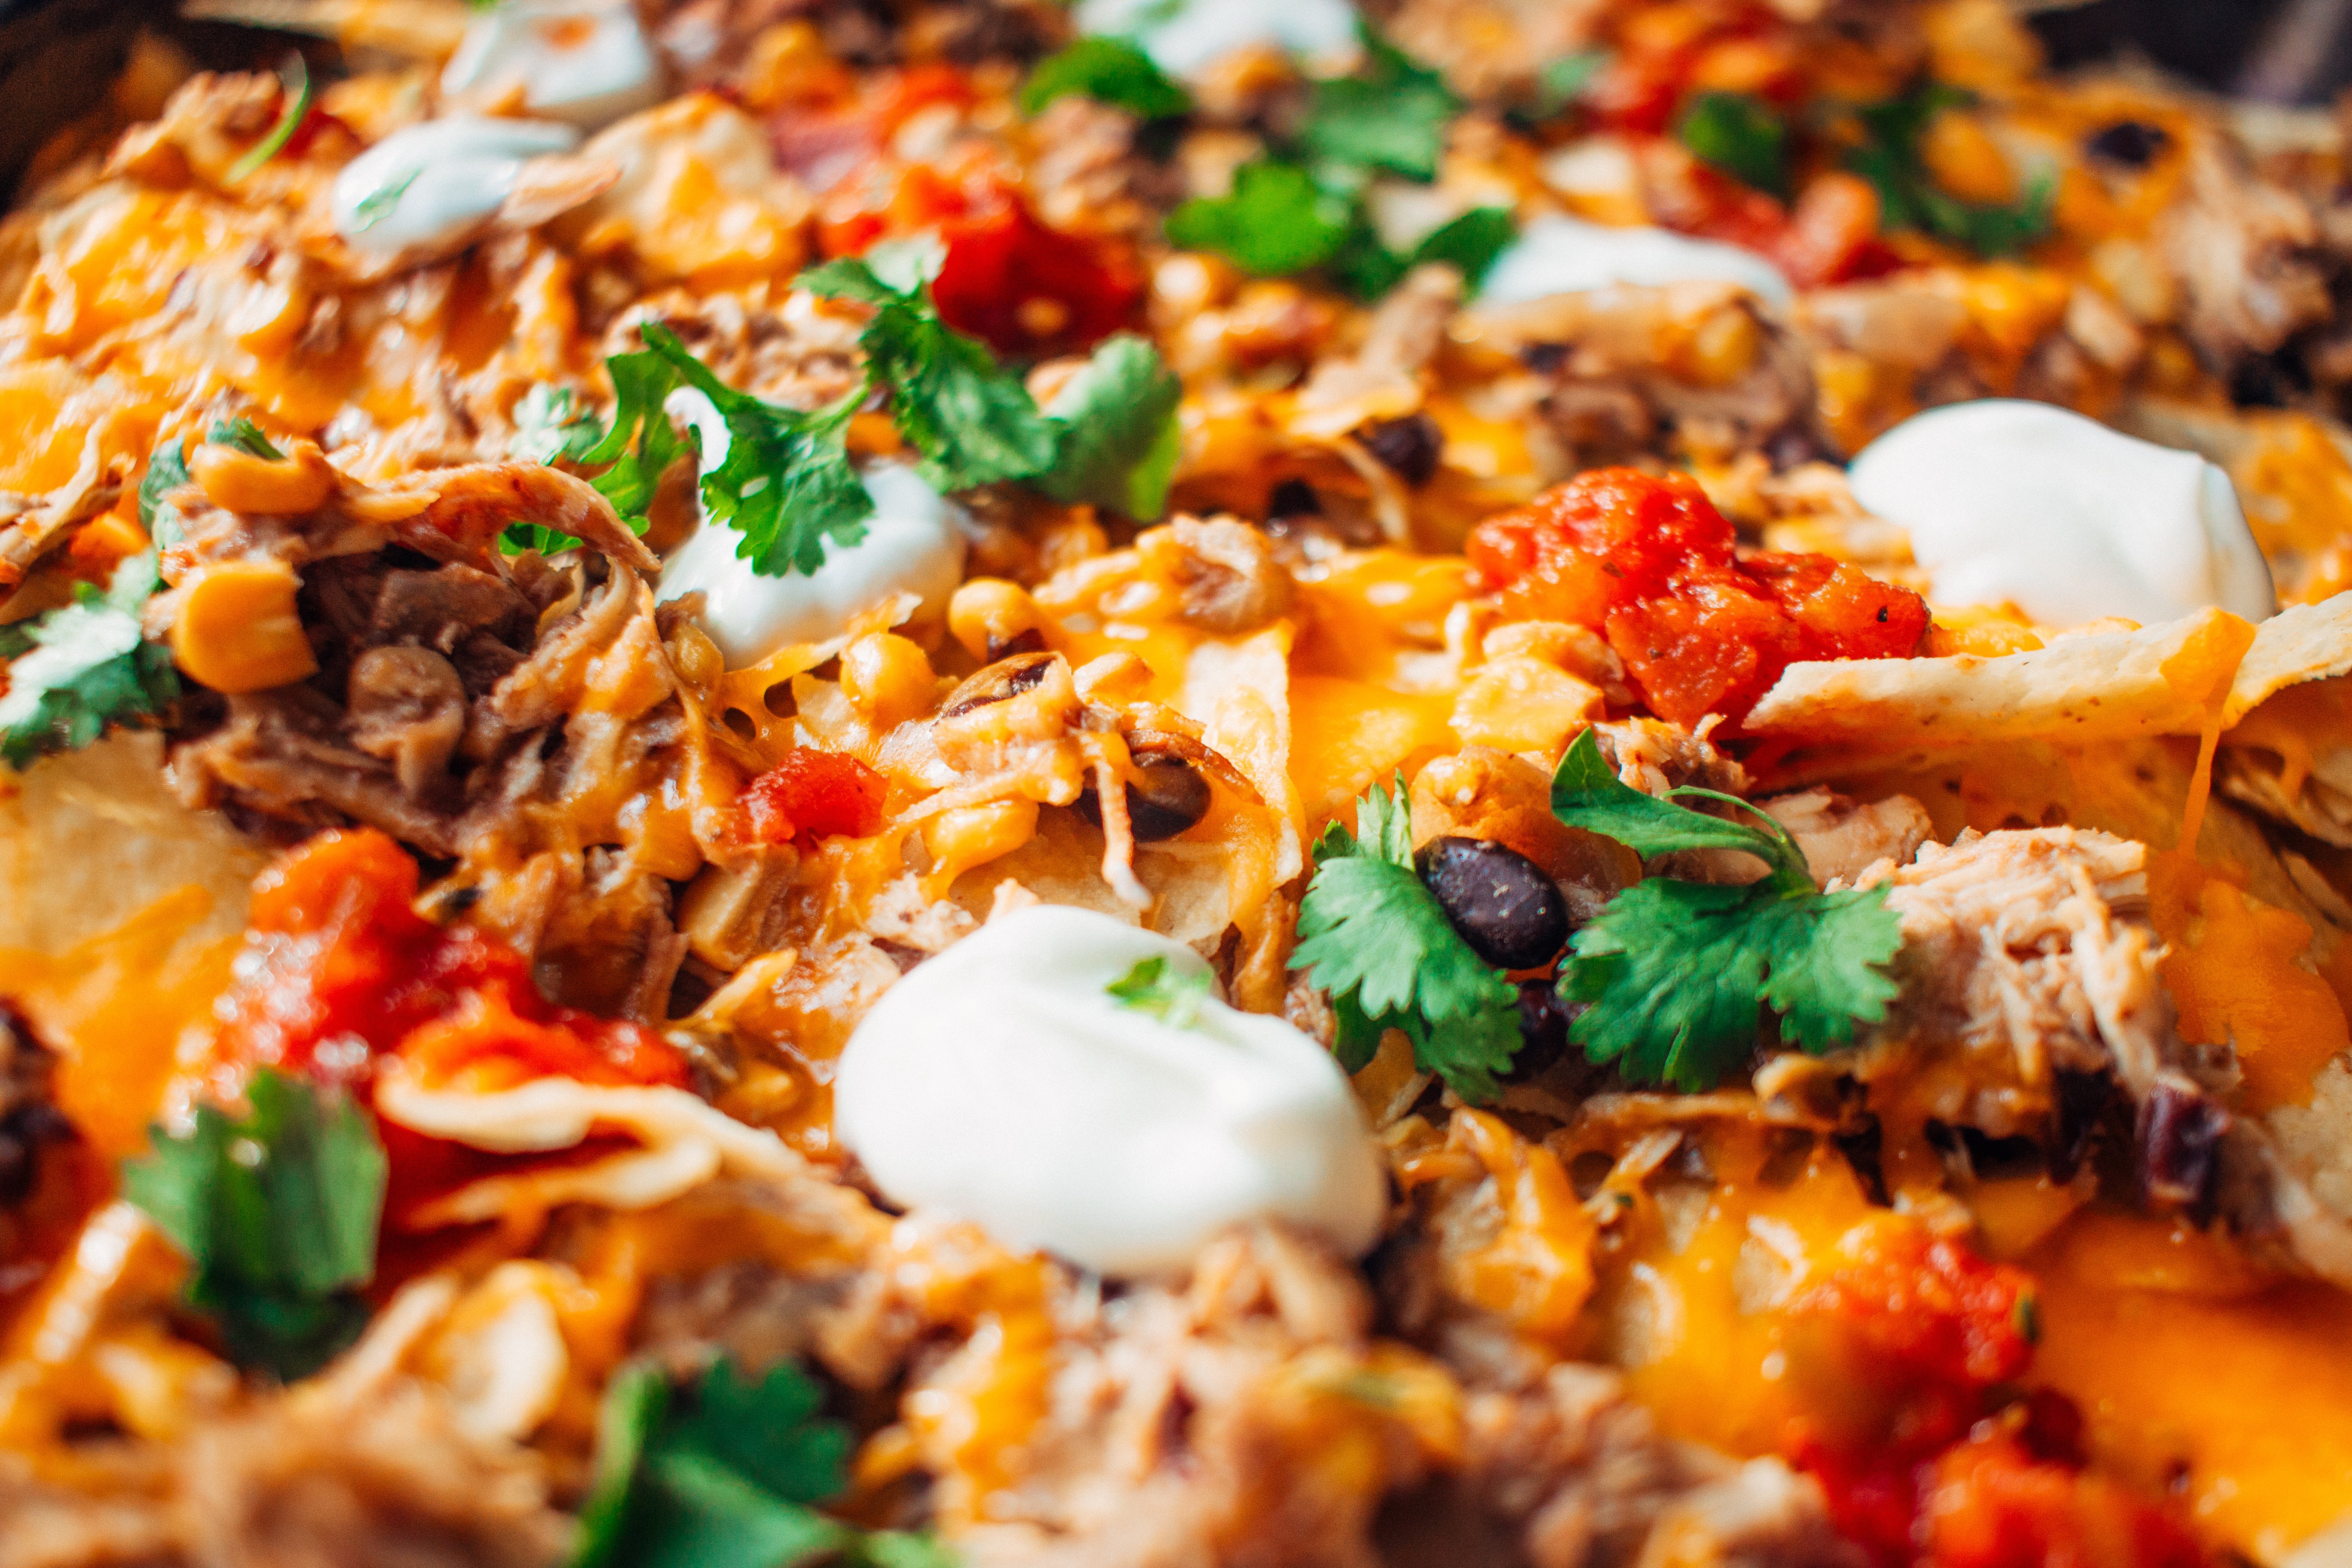 Instant pot chicken nachos with toppings ready to eat.